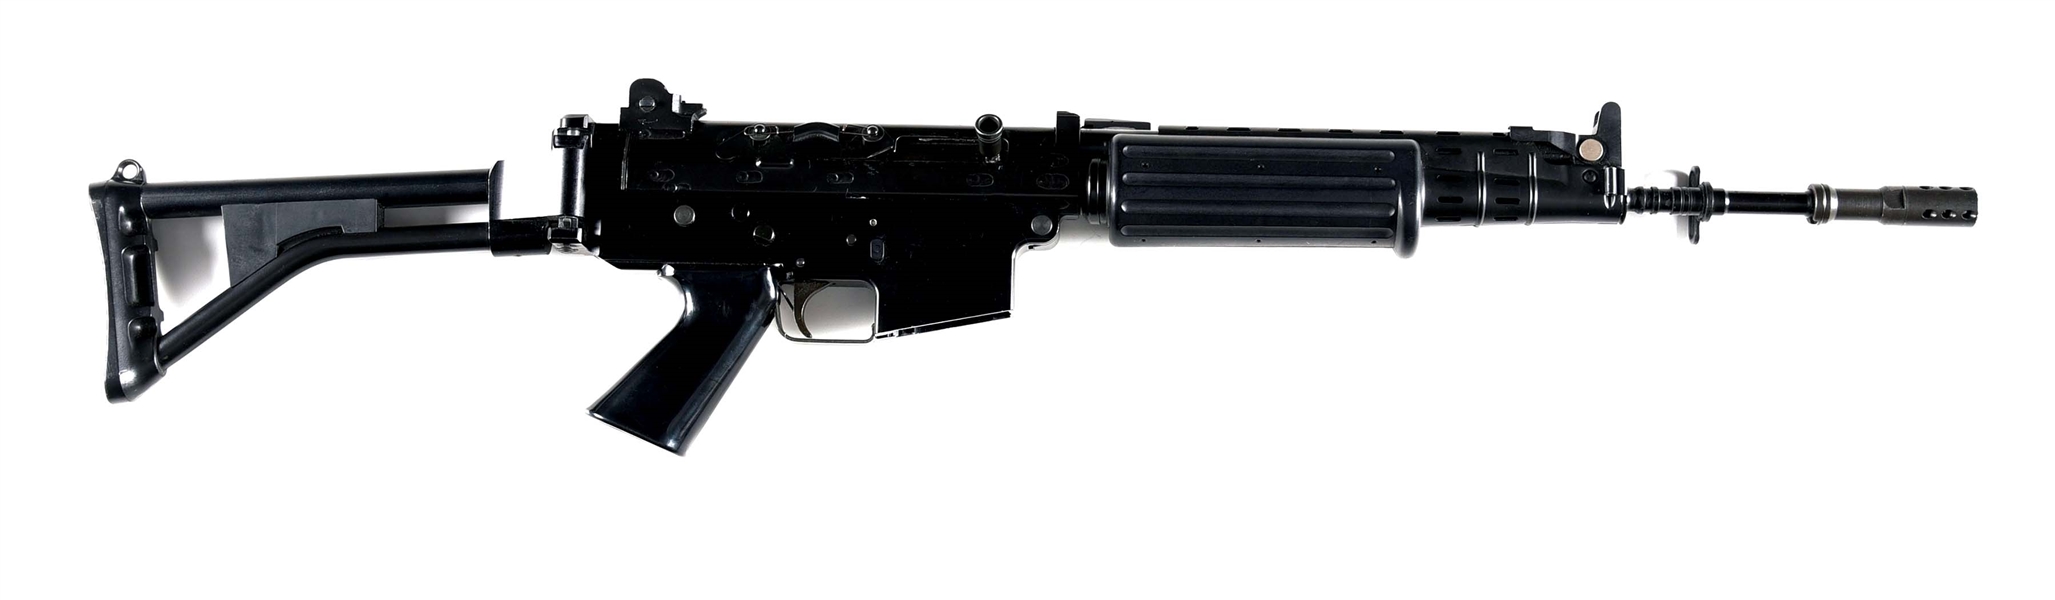 (N) FABRIQUE NATIONALE FNC PARA CARBINE HOST GUN WITH S&H ARMS AUTO SEAR MACHINE GUN (FULLY TRANSFERABLE).